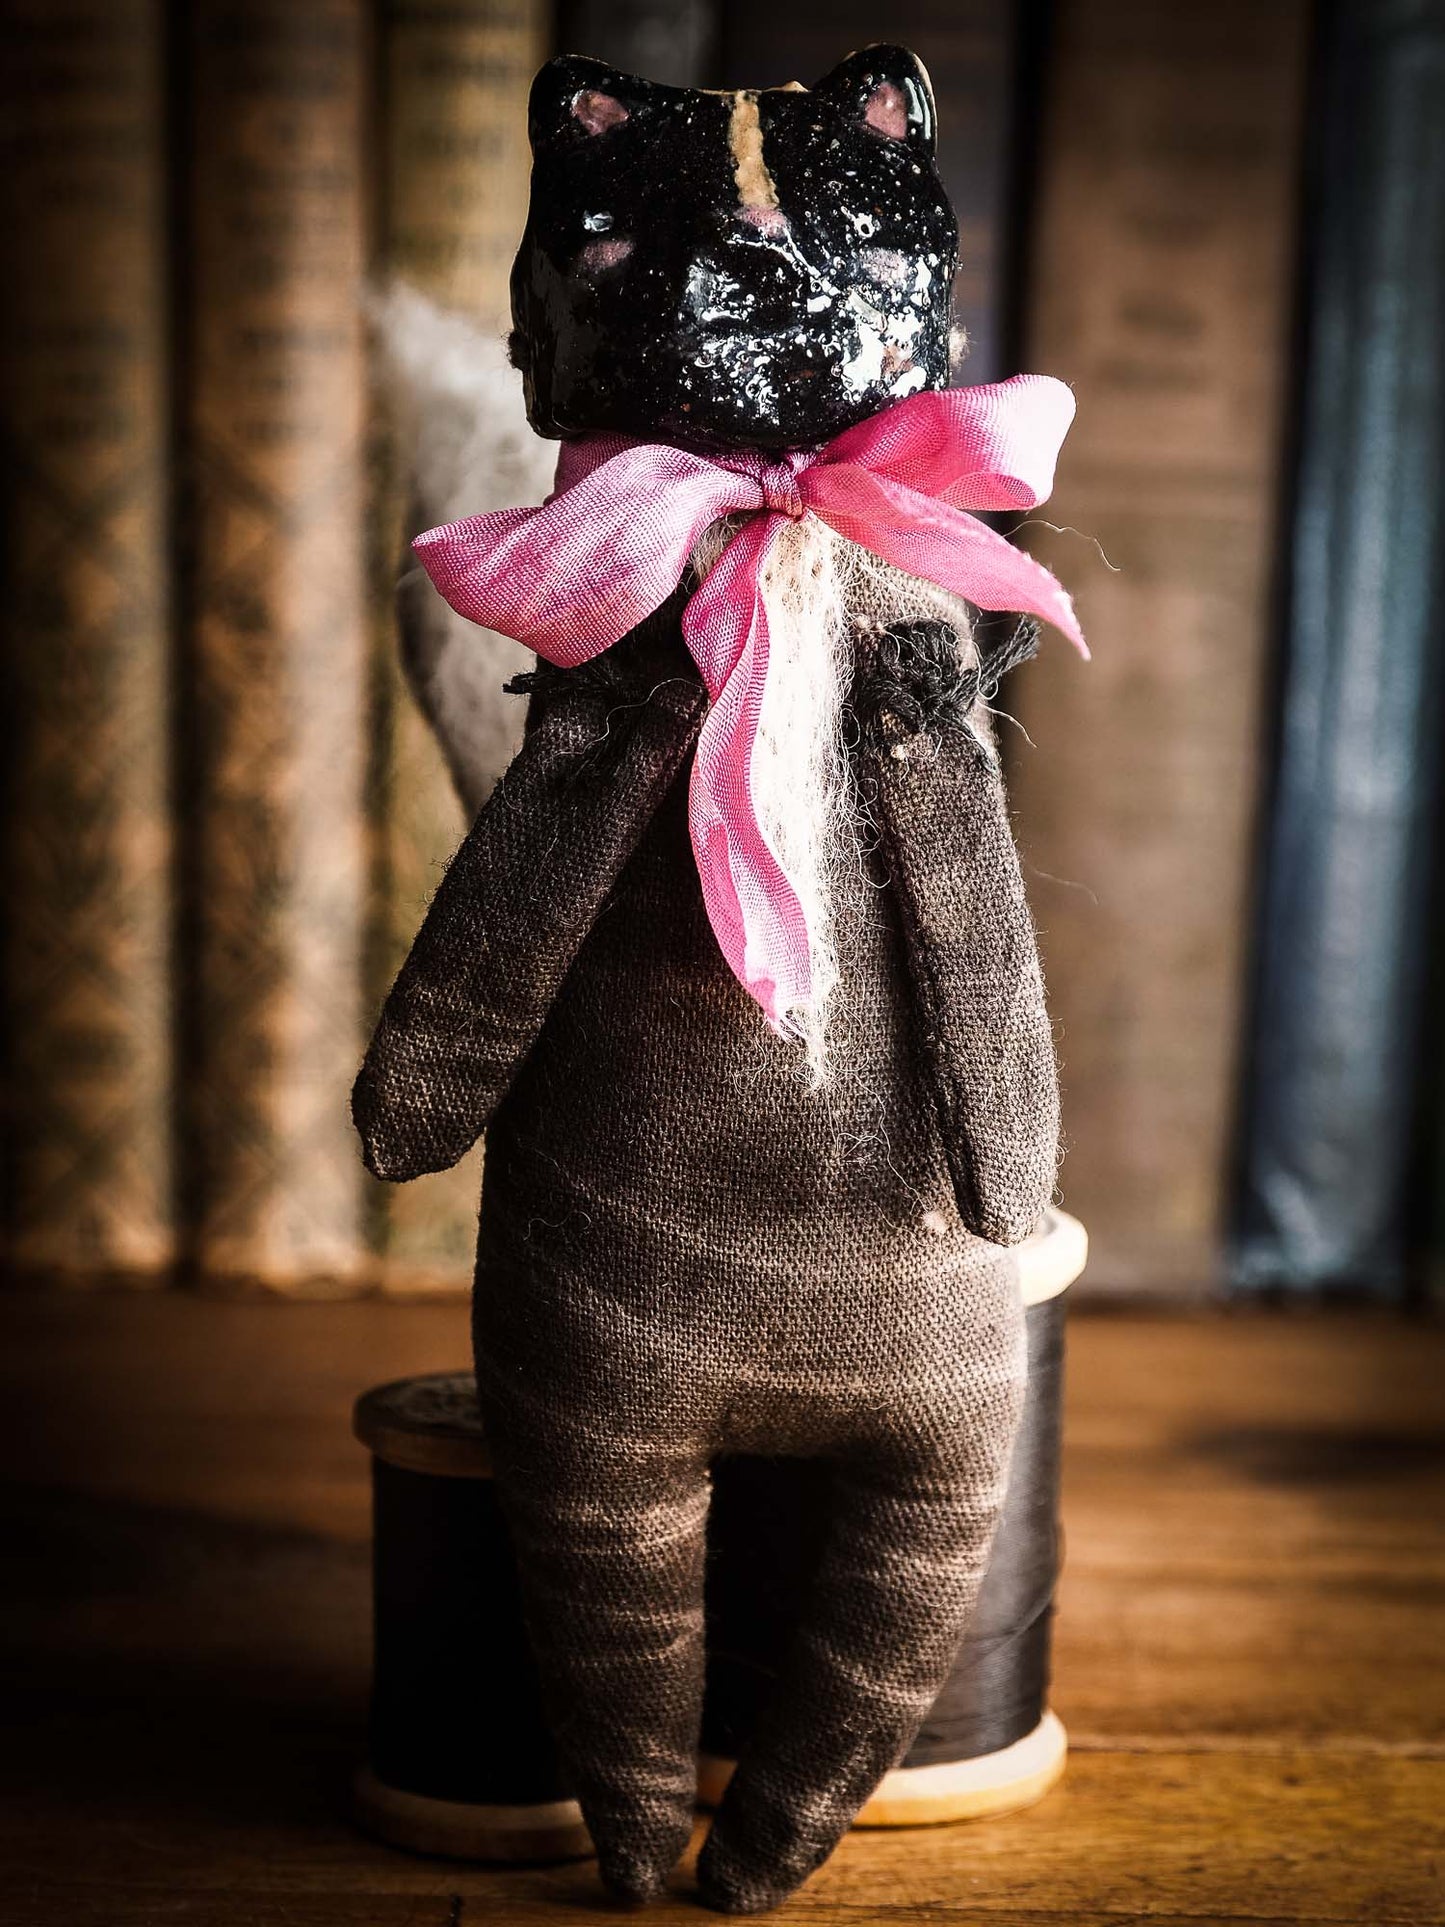 Skunk Toy Woodlands Soft sculpture art doll by Idania Salcido Danita Art with a Handmade ceramics face, organic dyed fabric and silk bow